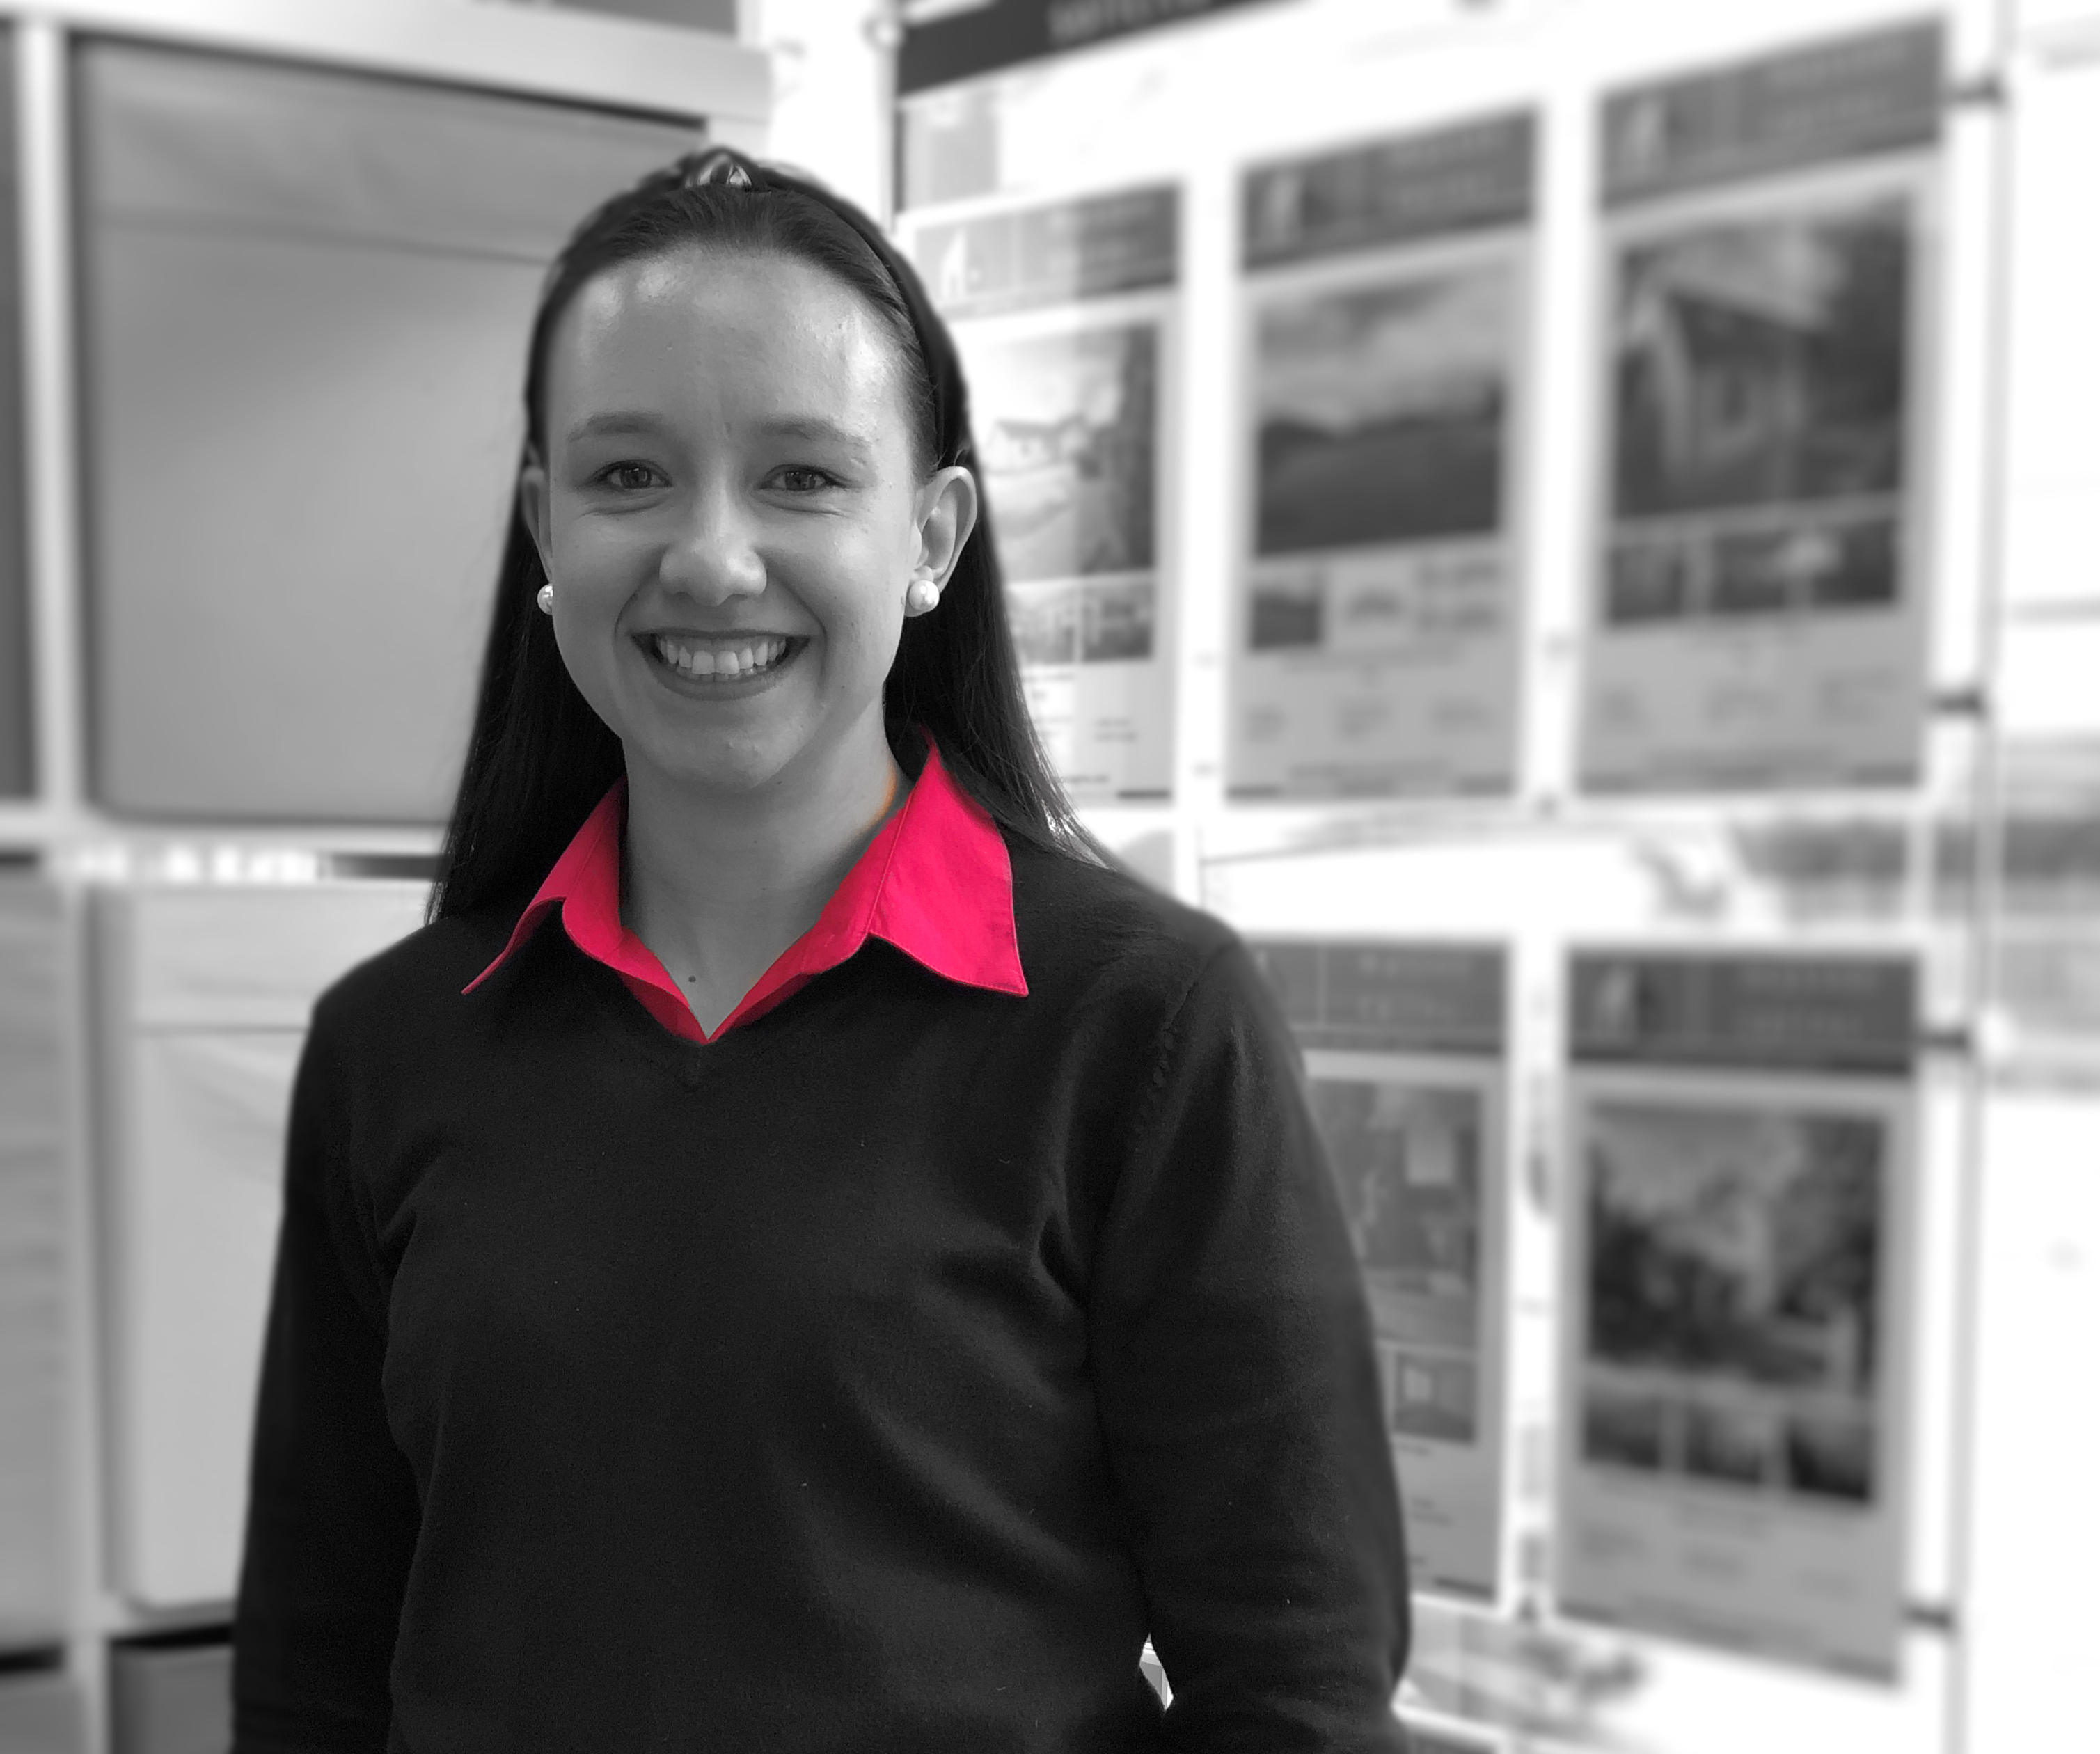 Mariaan Pita, Assistant Estate Agency Manager